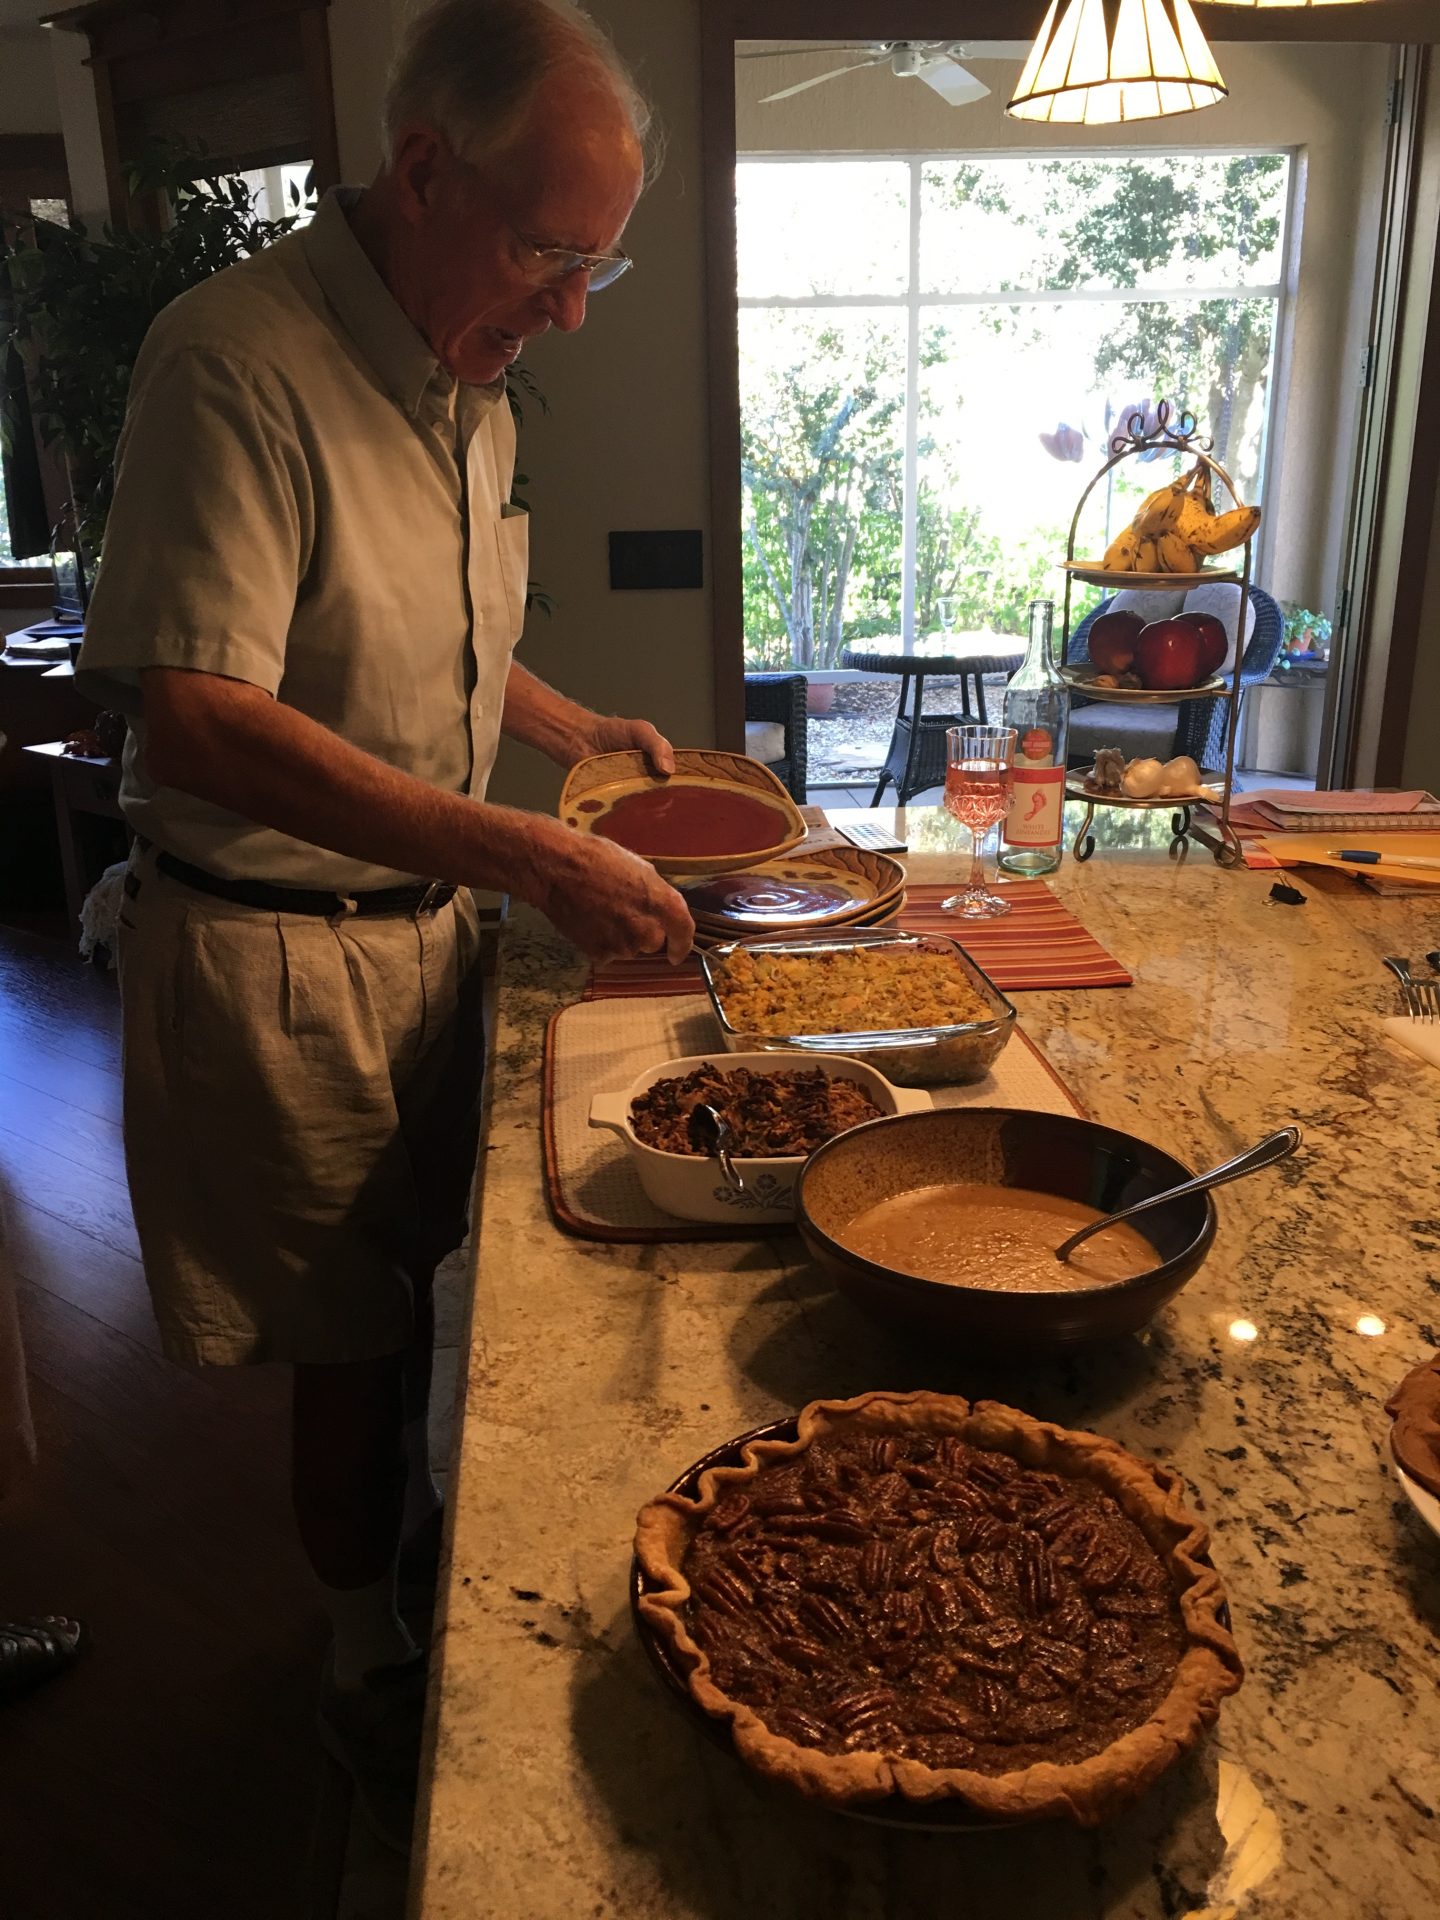 David made the pecan pies for our Thanksgiving dinners for several years... from scratch, crust and all.  The best!!